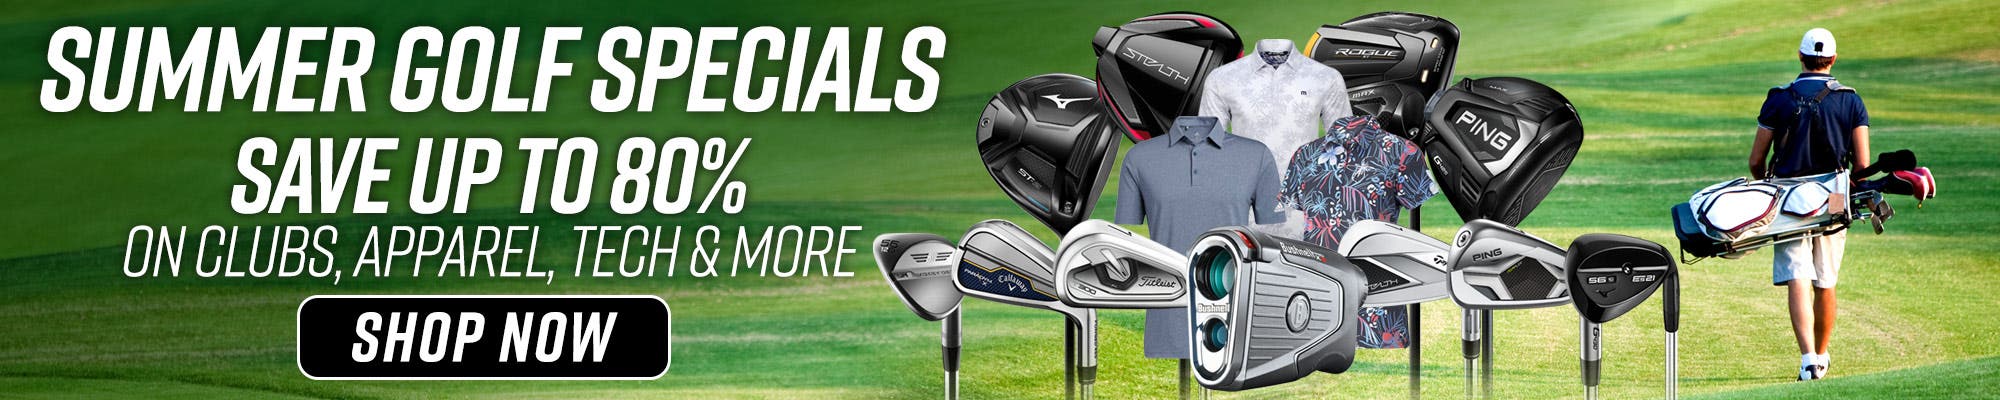 Summer Golf Specials | Save up to 80% on clubs, apparel, tech & more